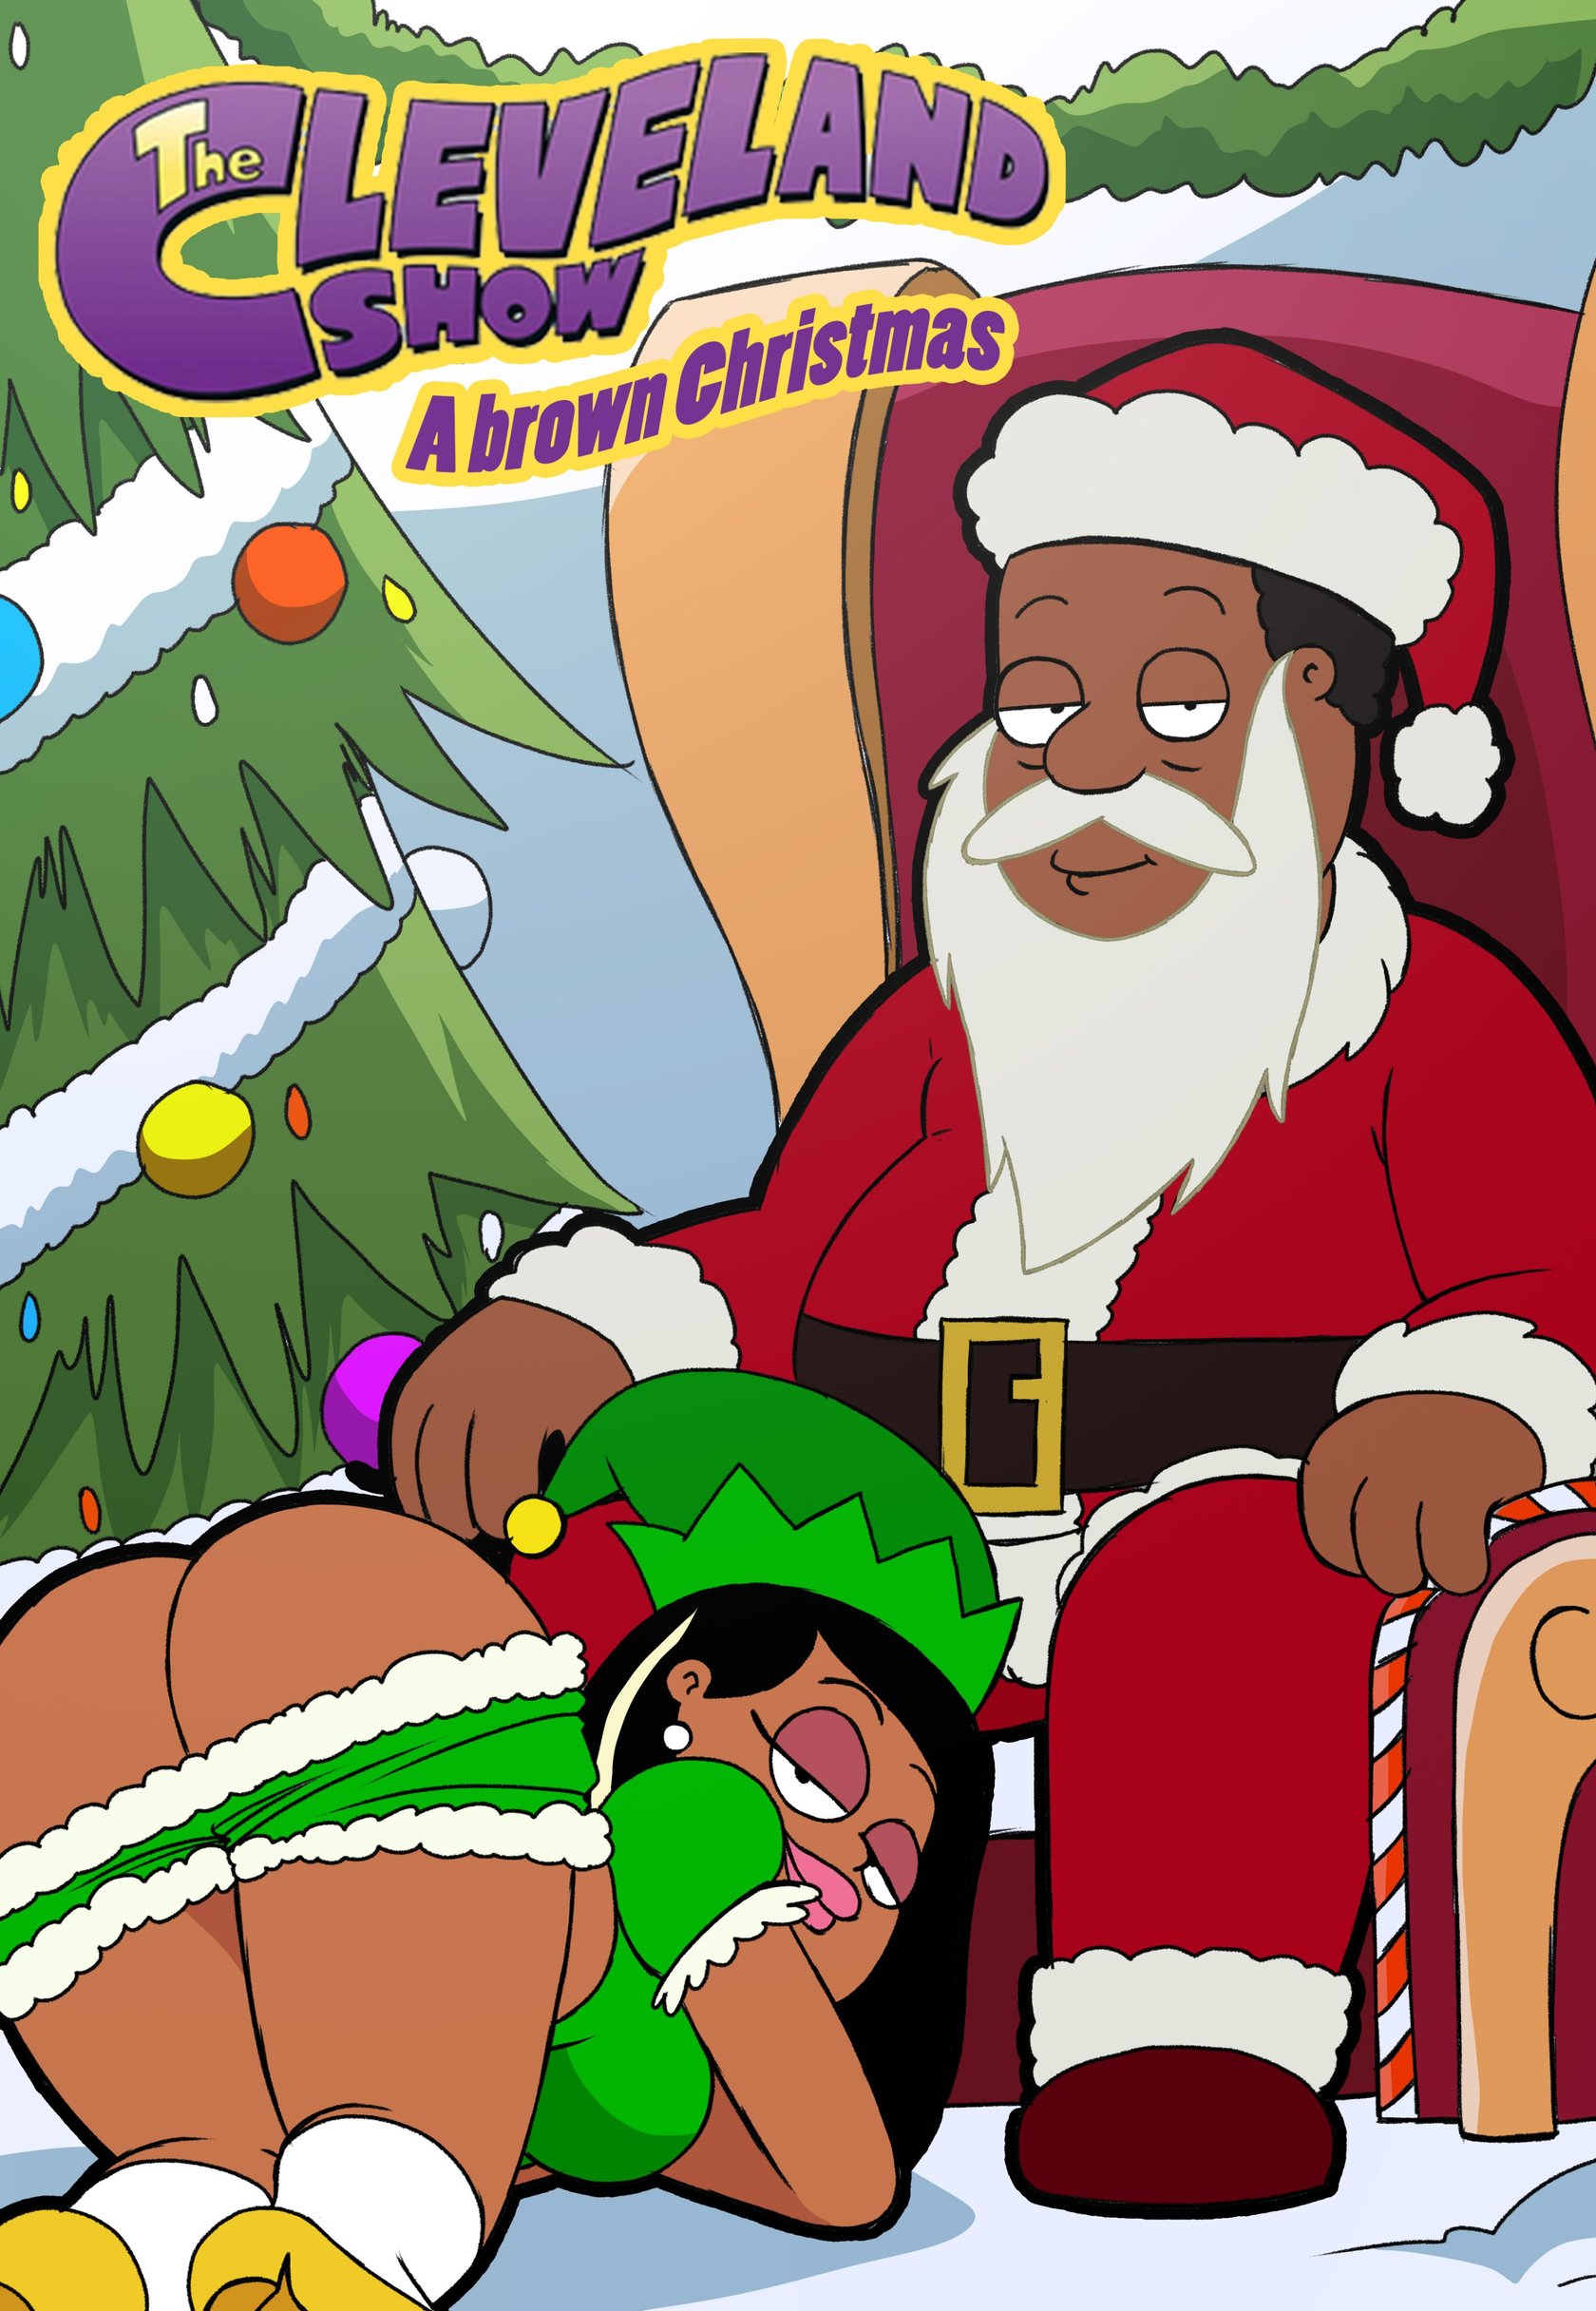 Shemales In Cleveland - A brown Christmas- The Cleveland show - Porn Cartoon Comics